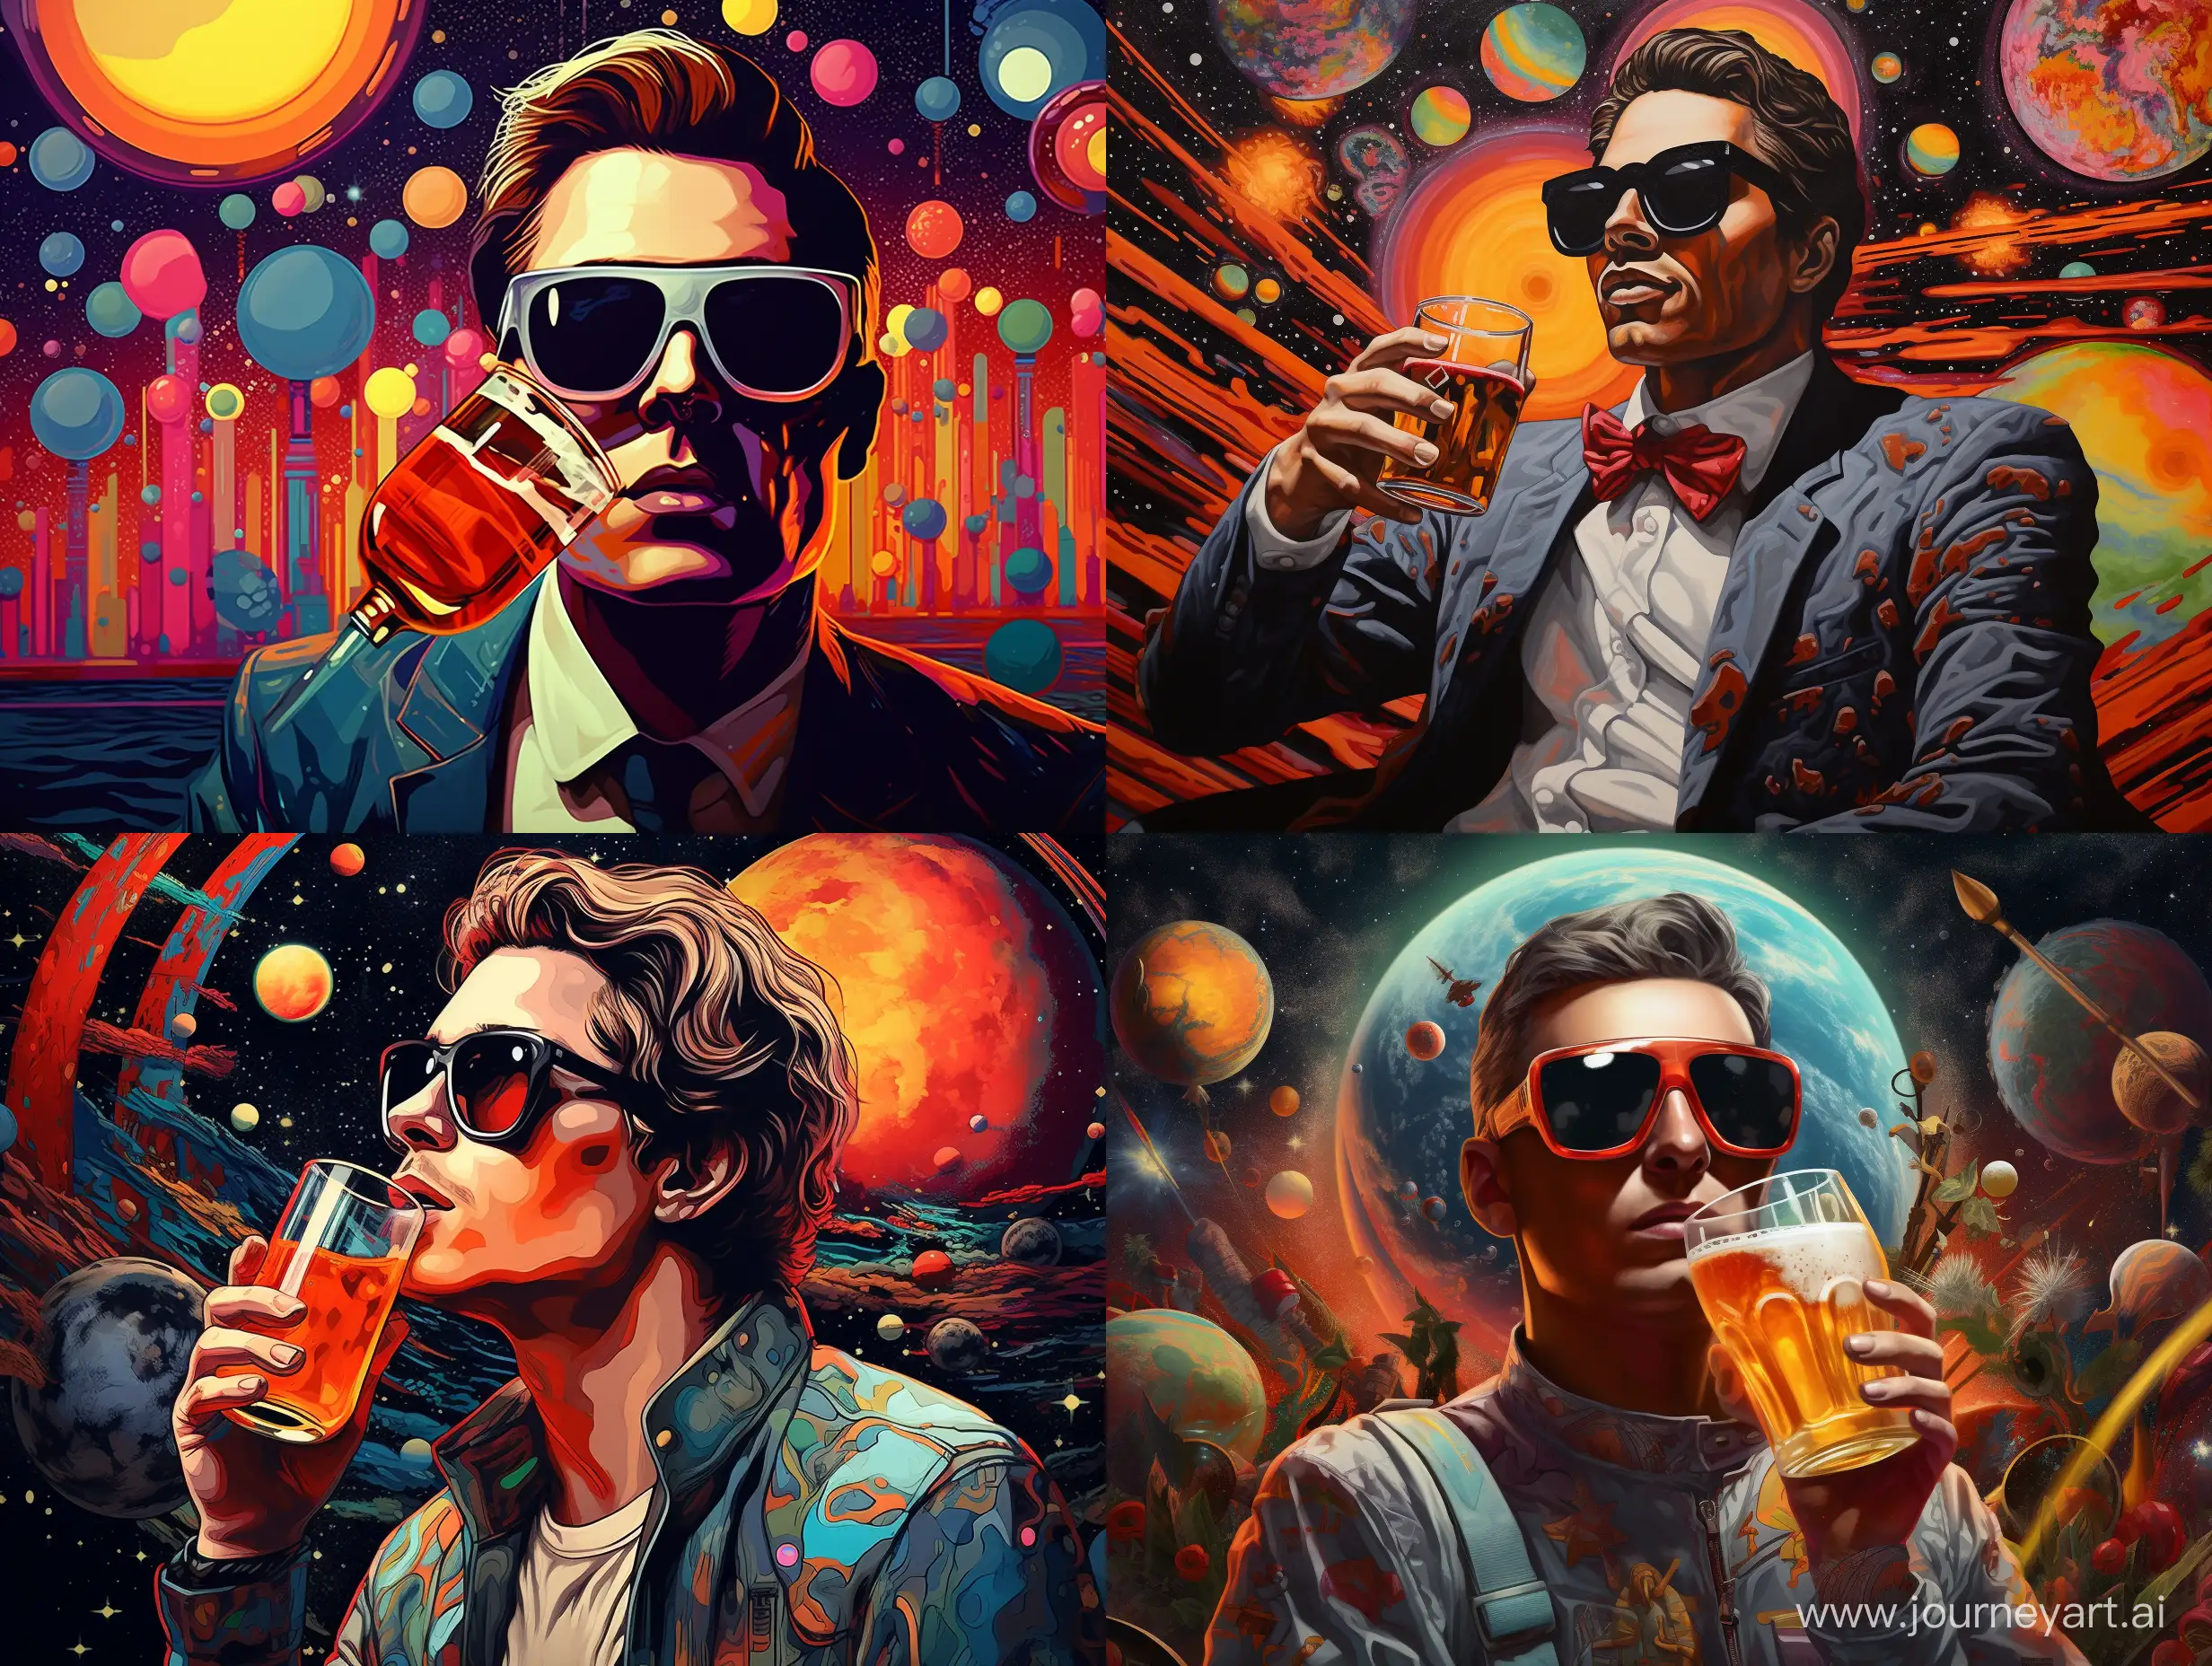 Futuristic-Man-with-Magic-Glasses-Enjoying-SpaceThemed-Beer